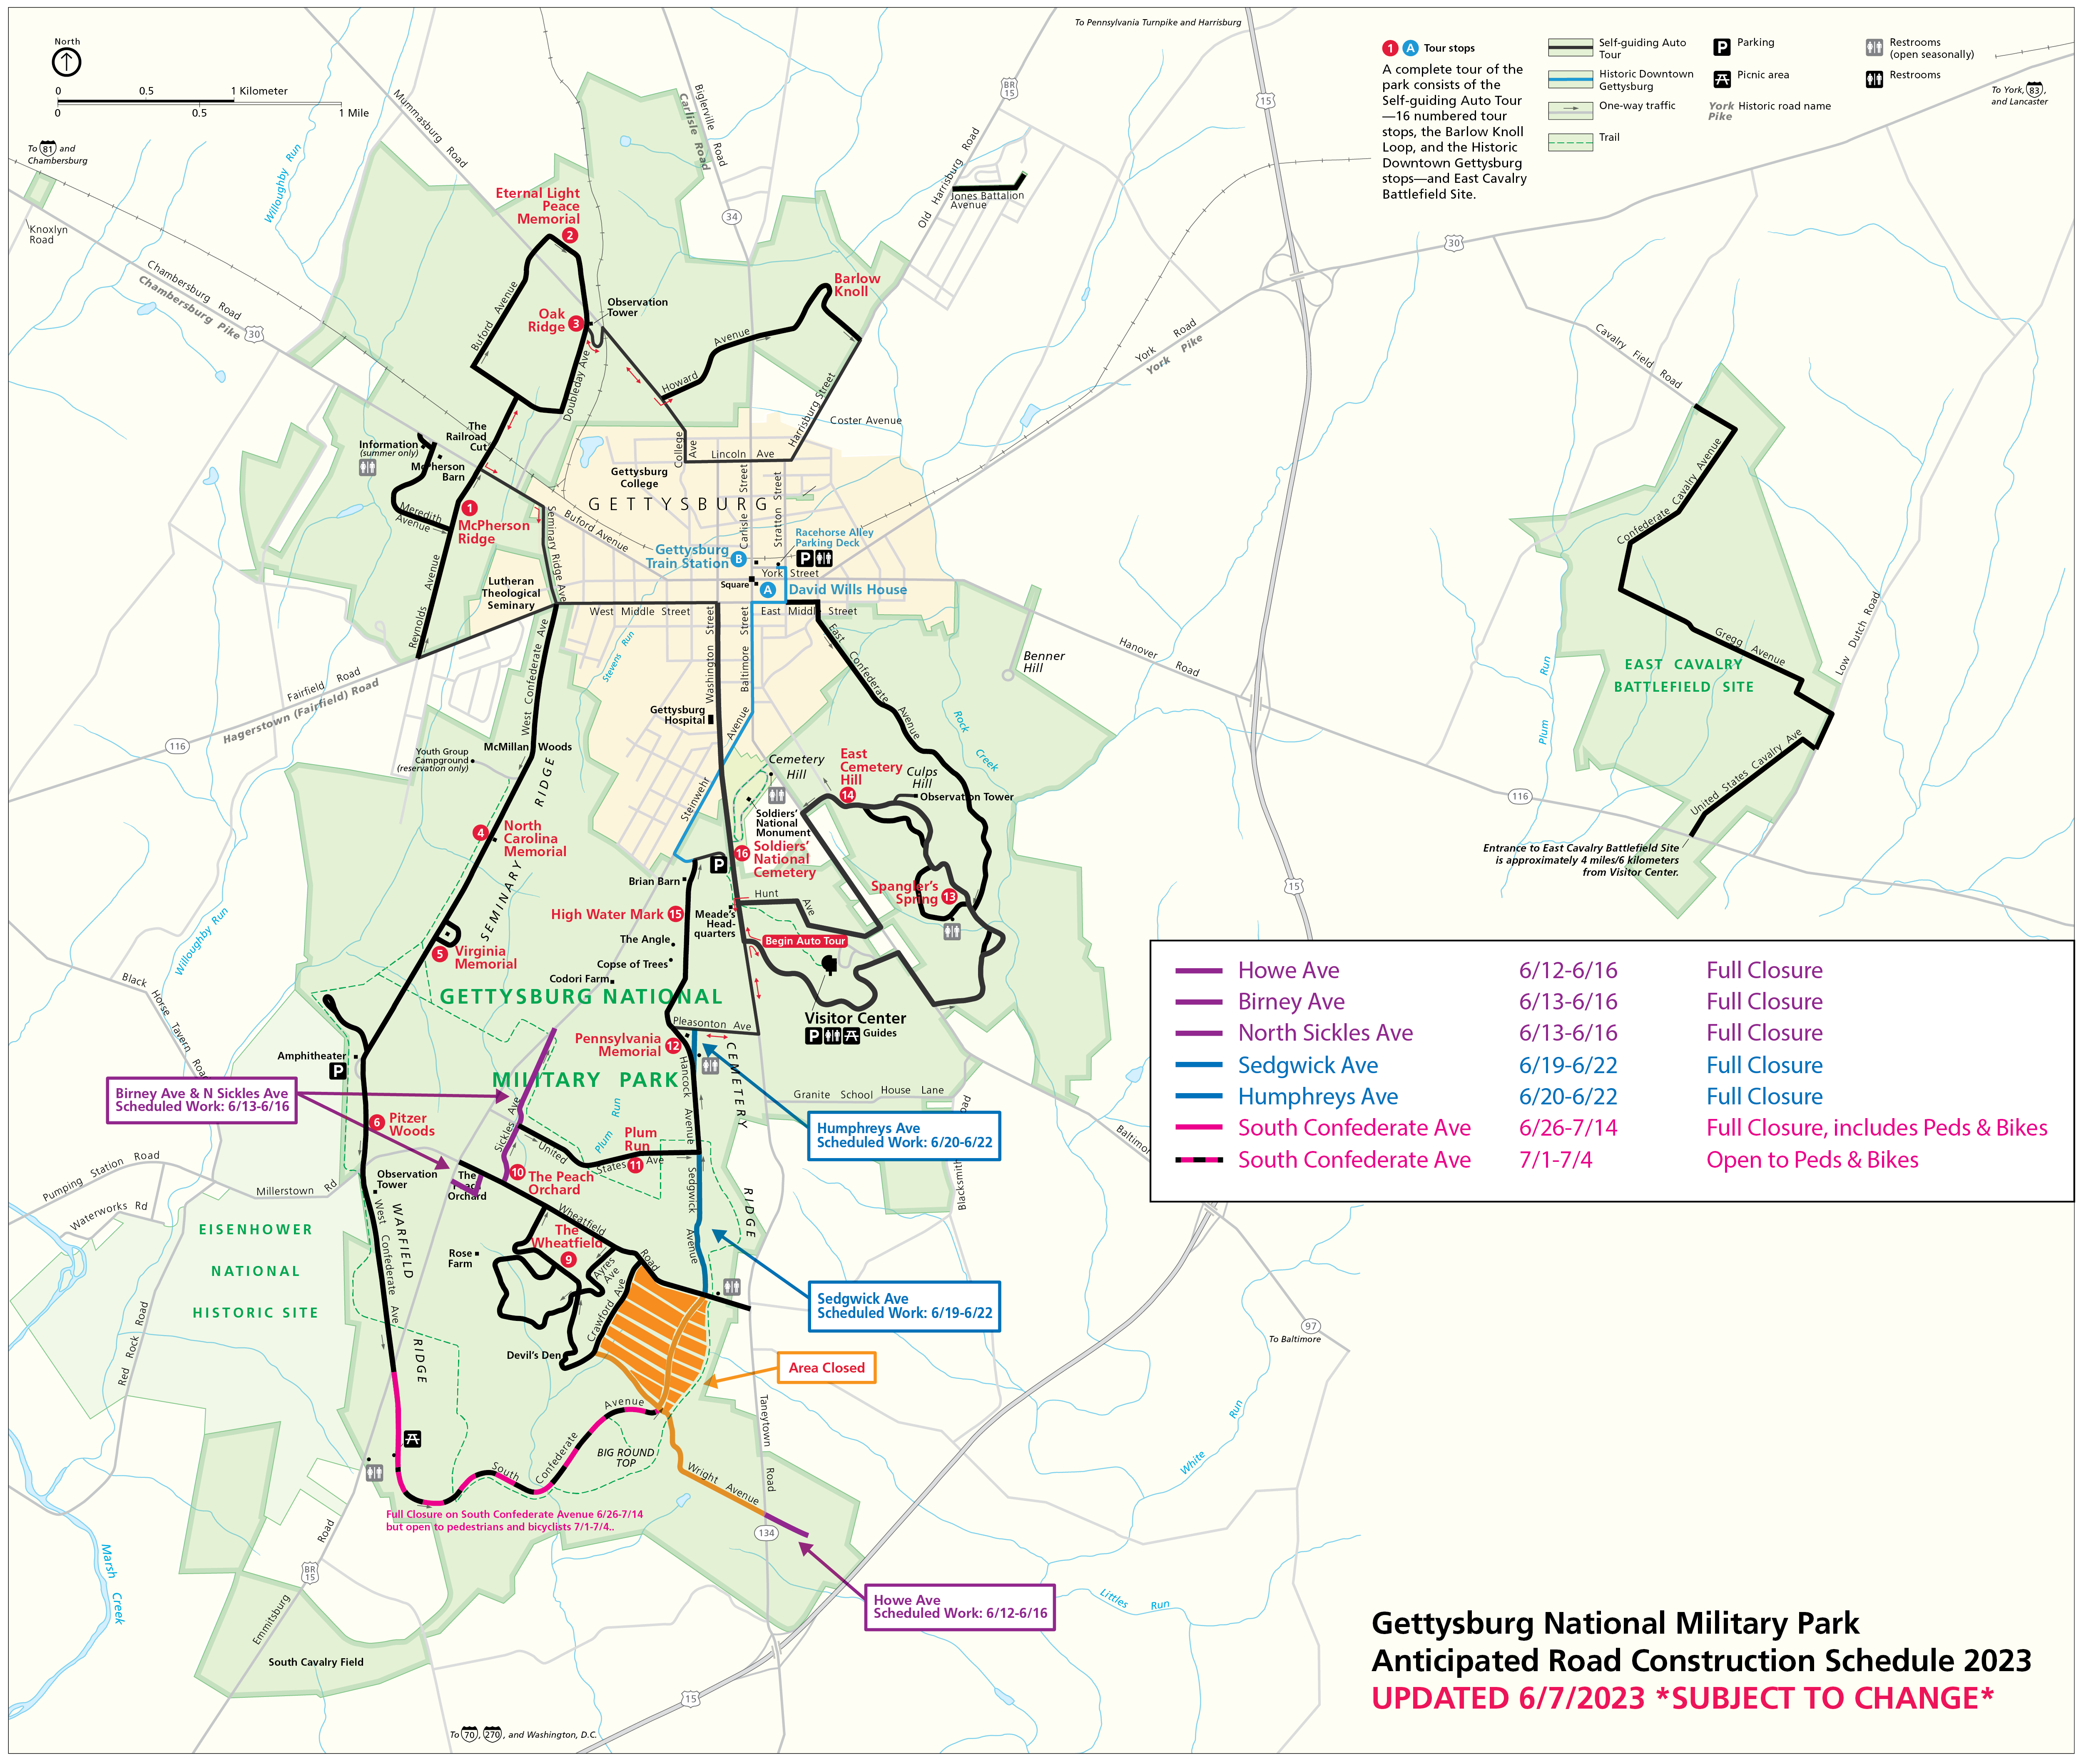 A color map of the Gettysburg battlefield. Black lines represent roads that won't be paved while pink, purple, and blue lines represent roads that will be paved during the month of June, 2023.